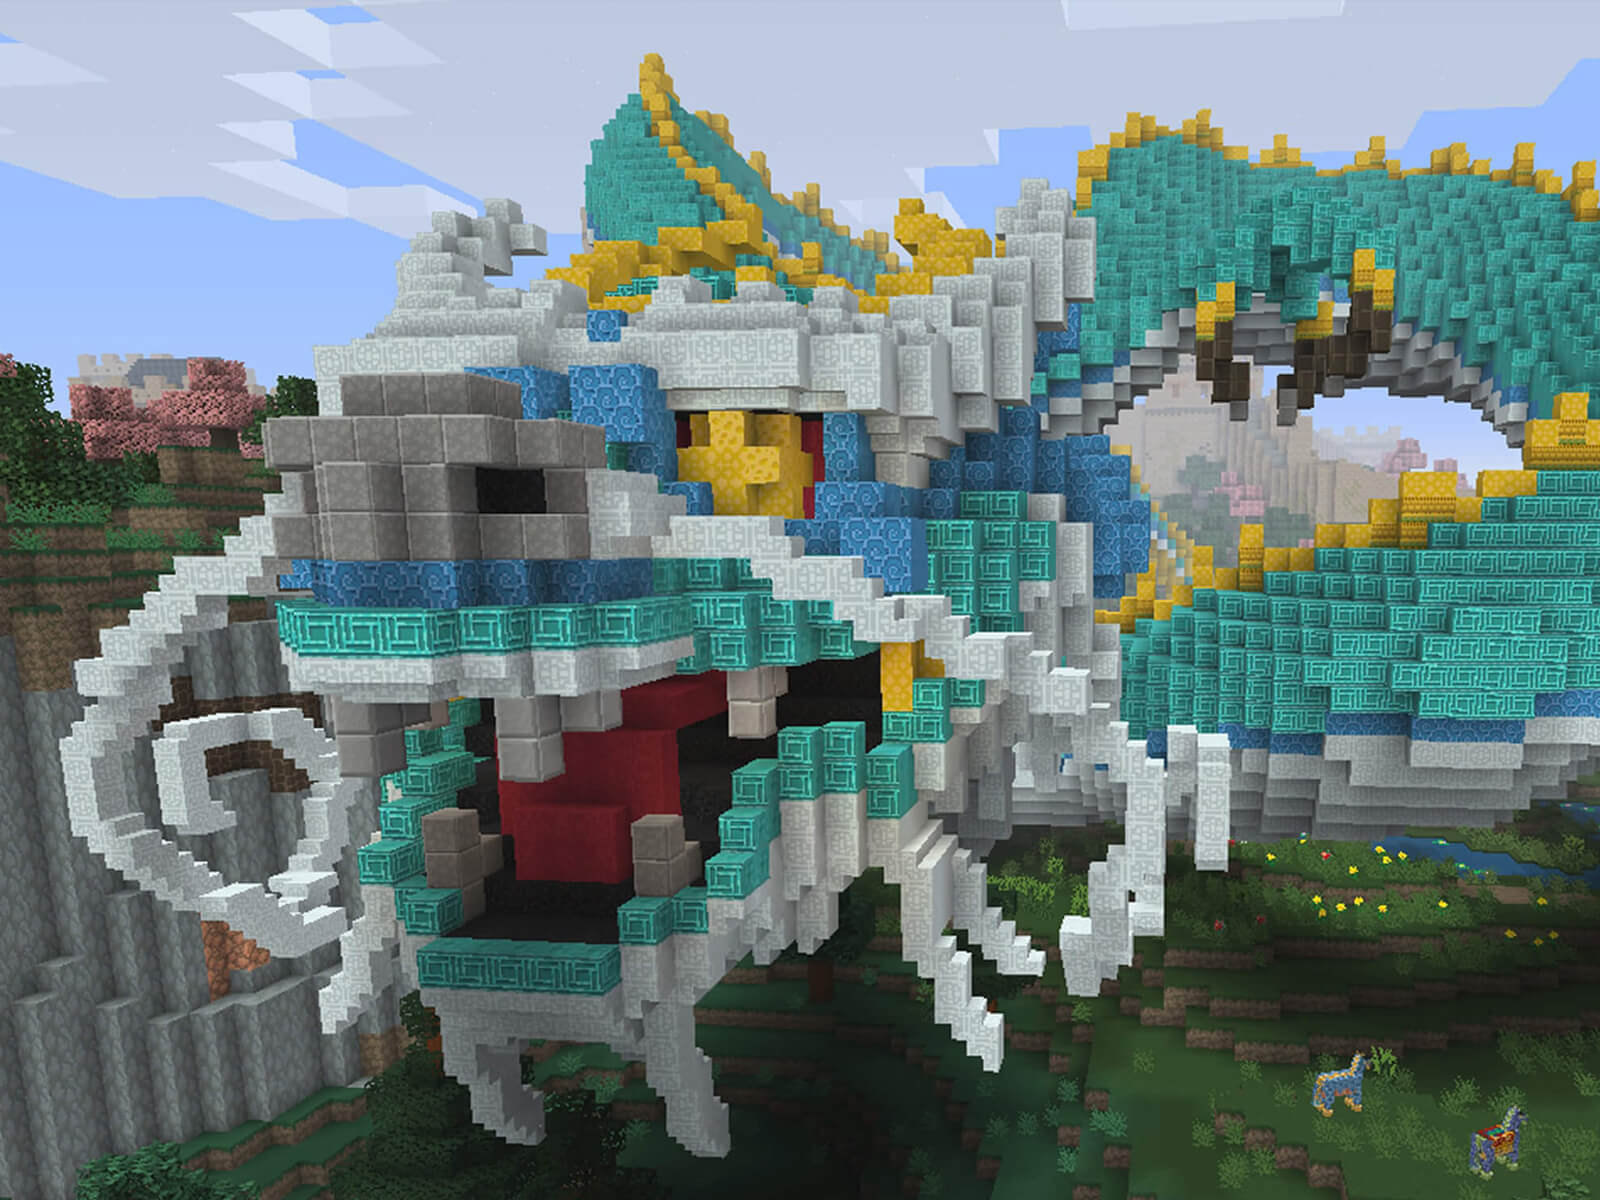 Screenshot of a huge Chinese-style dragon made out of blocks from Minecraft